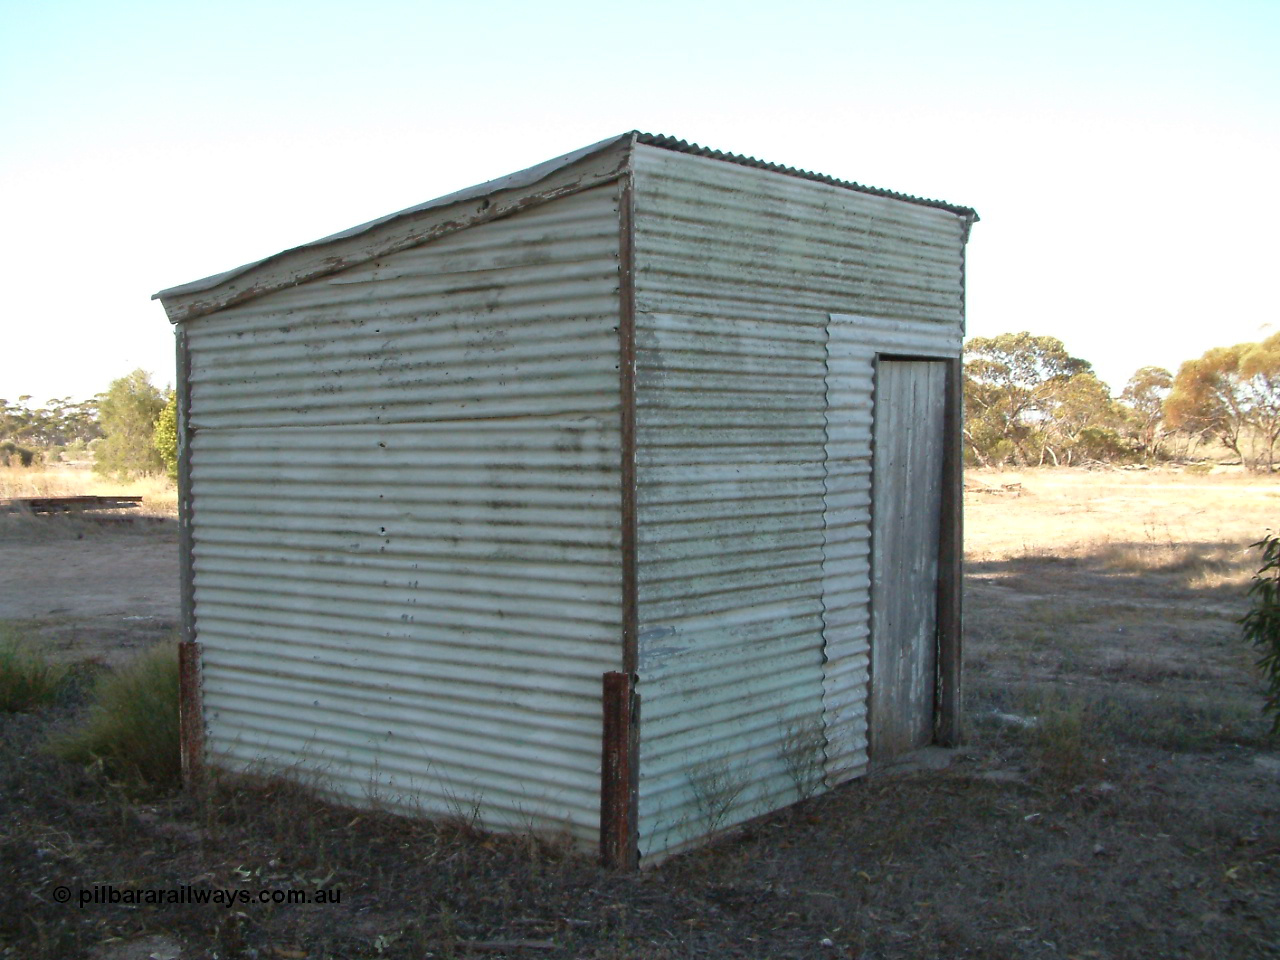 030405 154855
Lock, front view of corrugated iron building located across the tracks opposite the silos, 5th April 2003.
